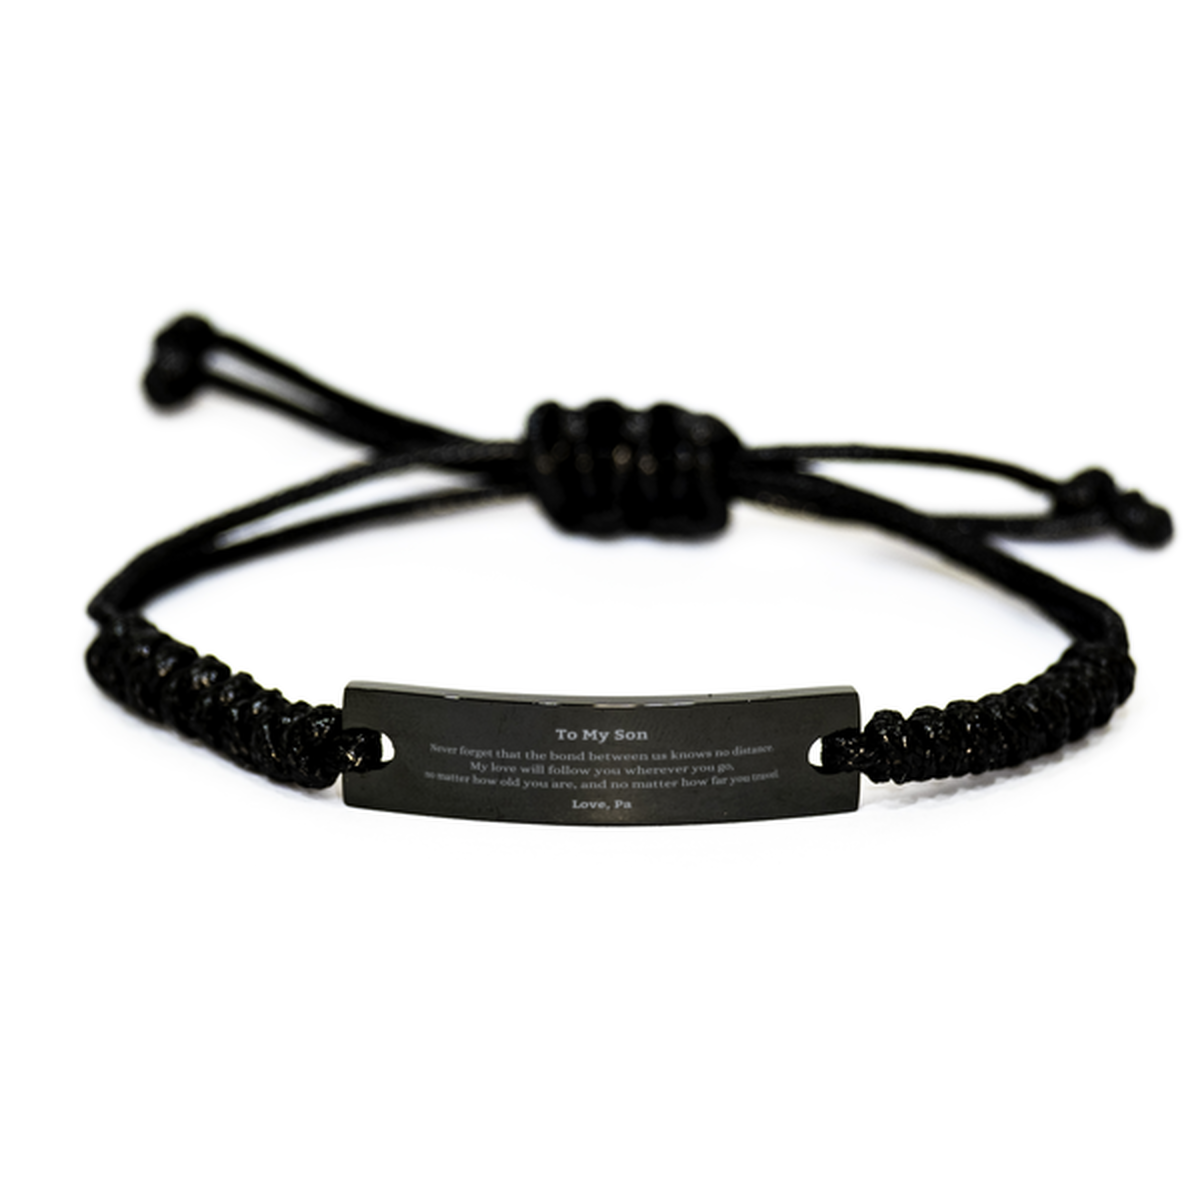 Son Birthday Gifts from Pa, Adjustable Black Rope Bracelet for Son Christmas Graduation Unique Gifts Son Never forget that the bond between us knows no distance. Love, Pa